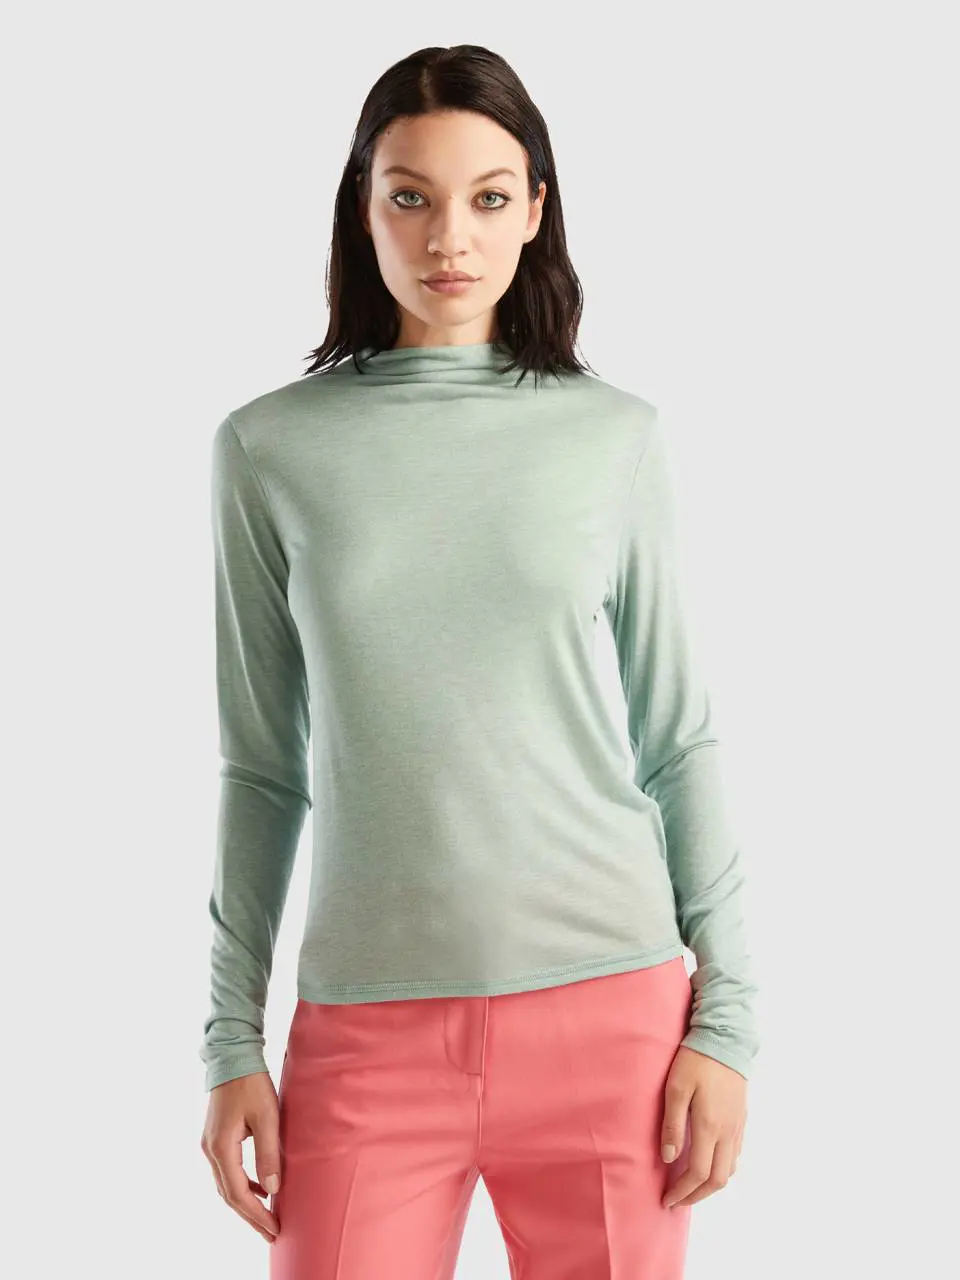 Benetton t-shirt in wool and viscose blend. 1